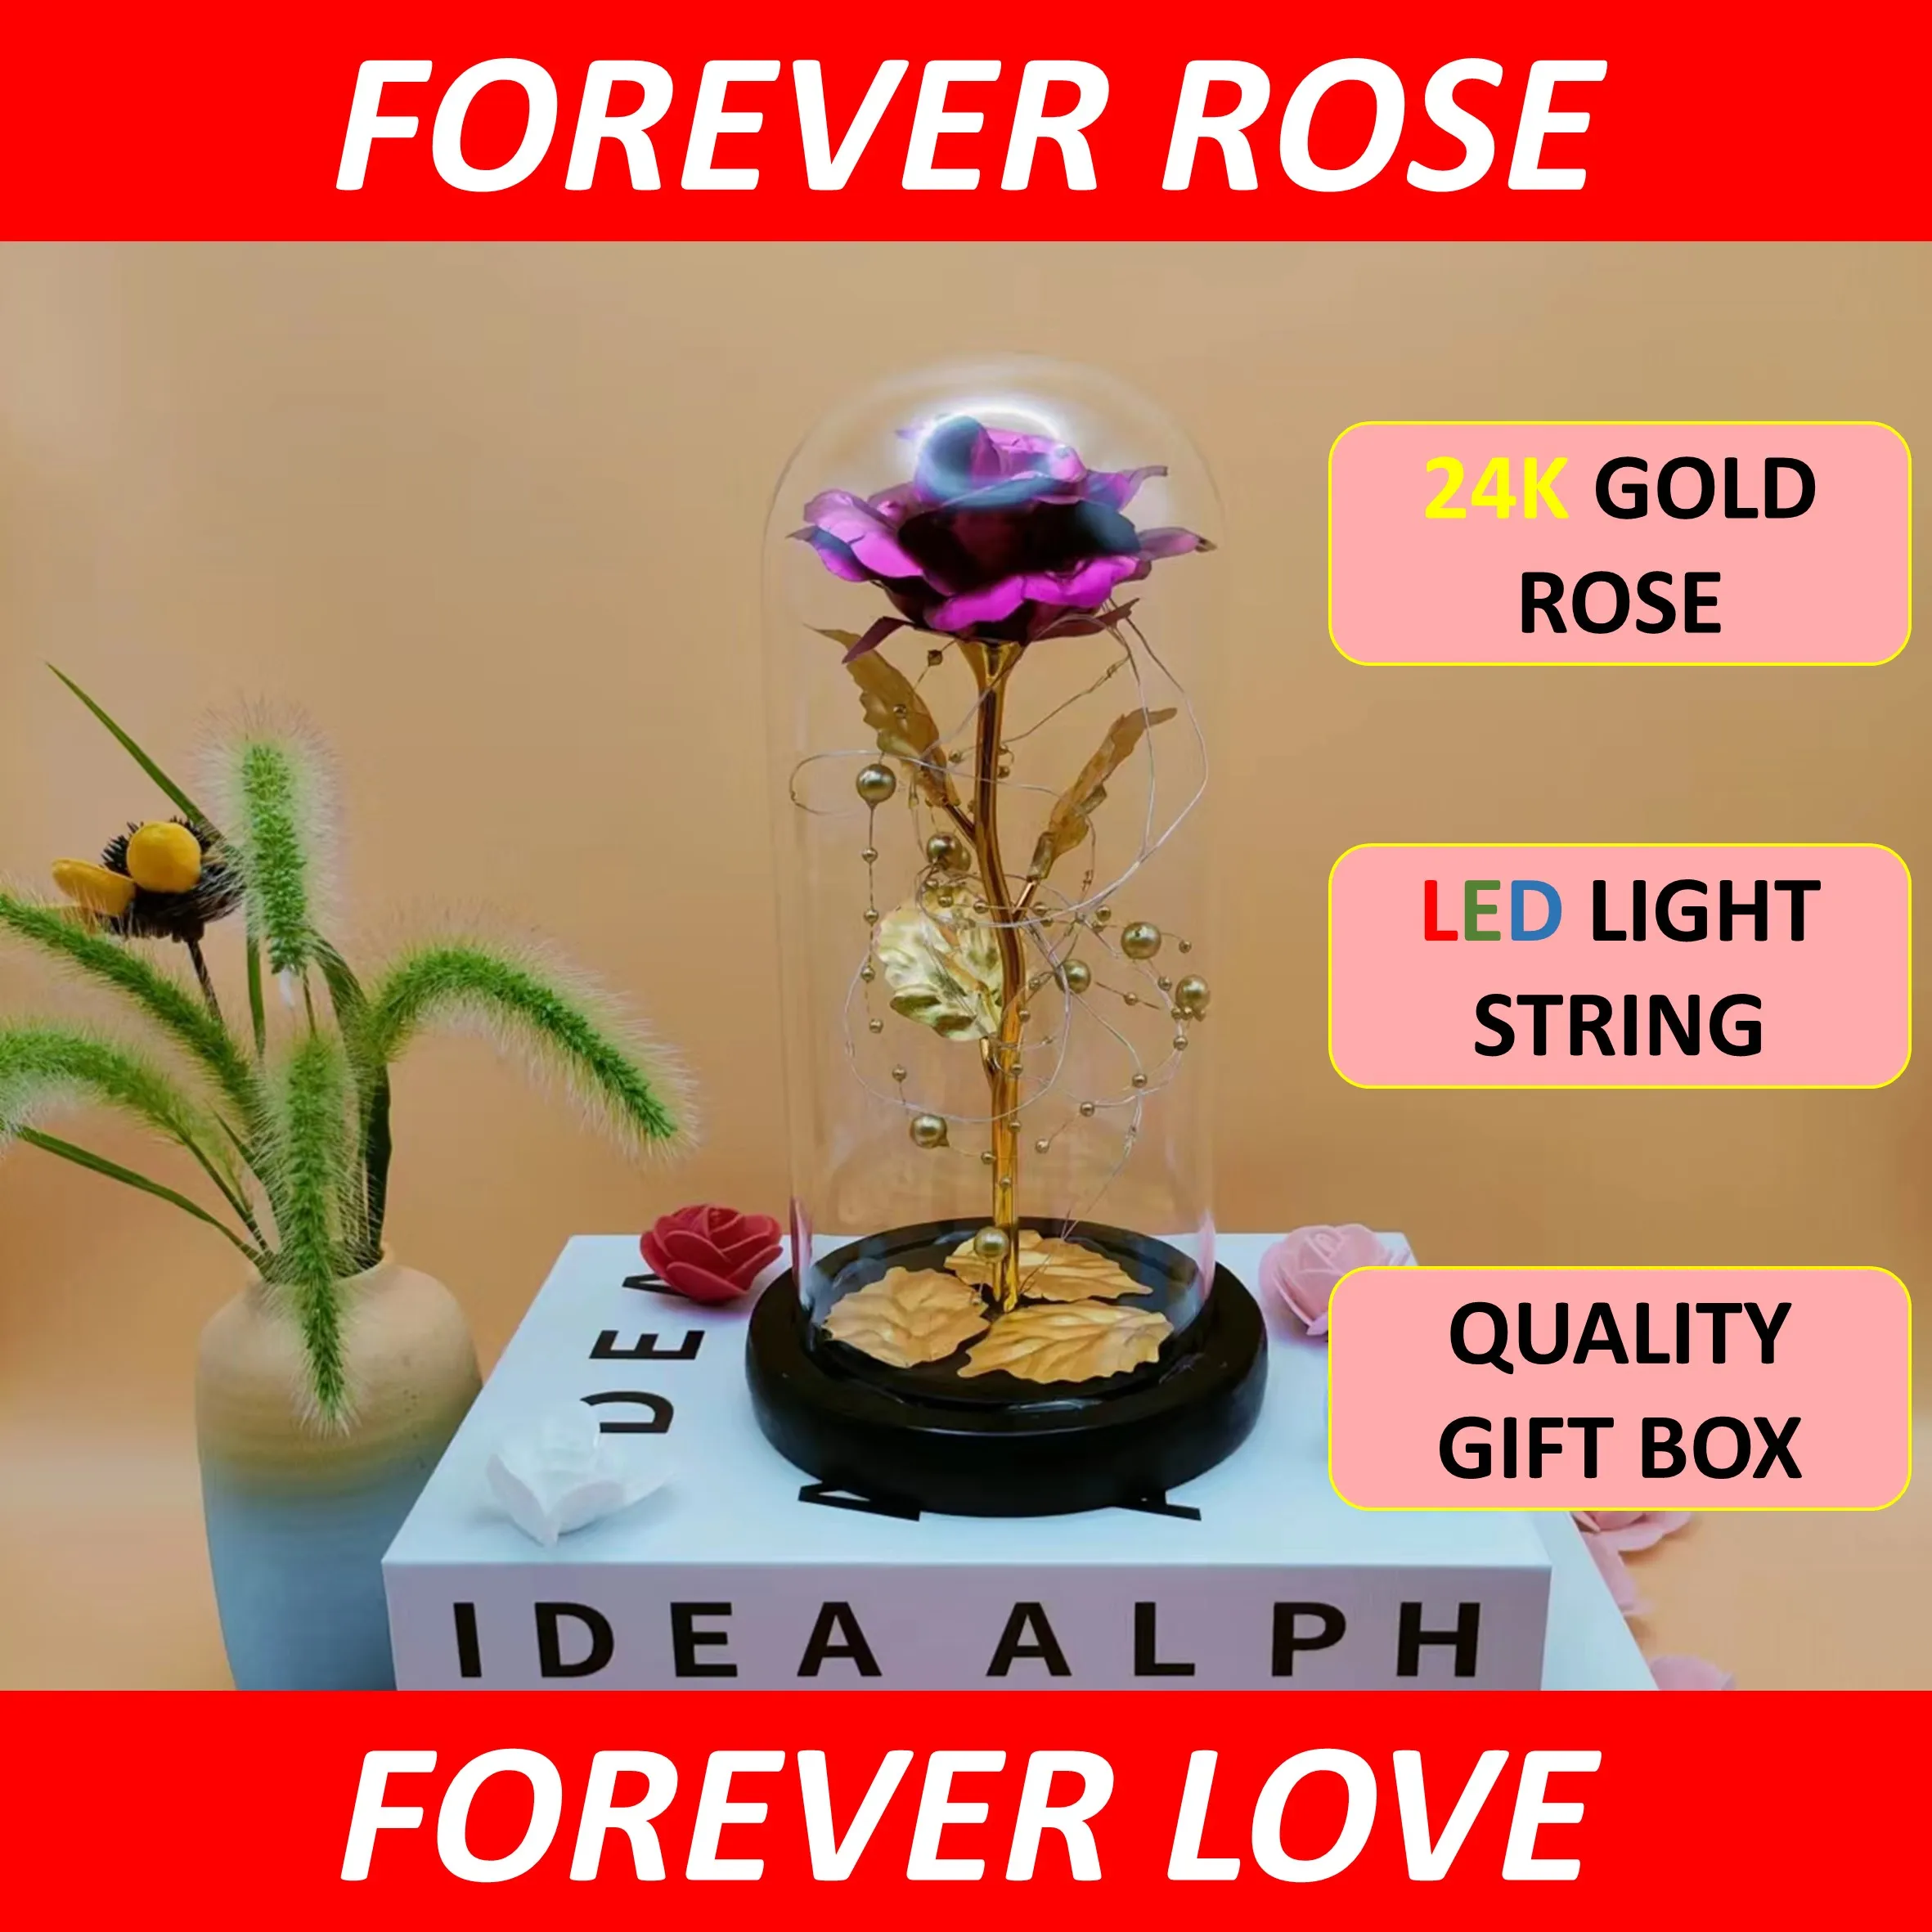 

LED Magic Galaxy Rose Eternal 24K Gold Foil Flower Dome With Fairy String Lights Gift Card Valentines Mothers Day Birthday Gift